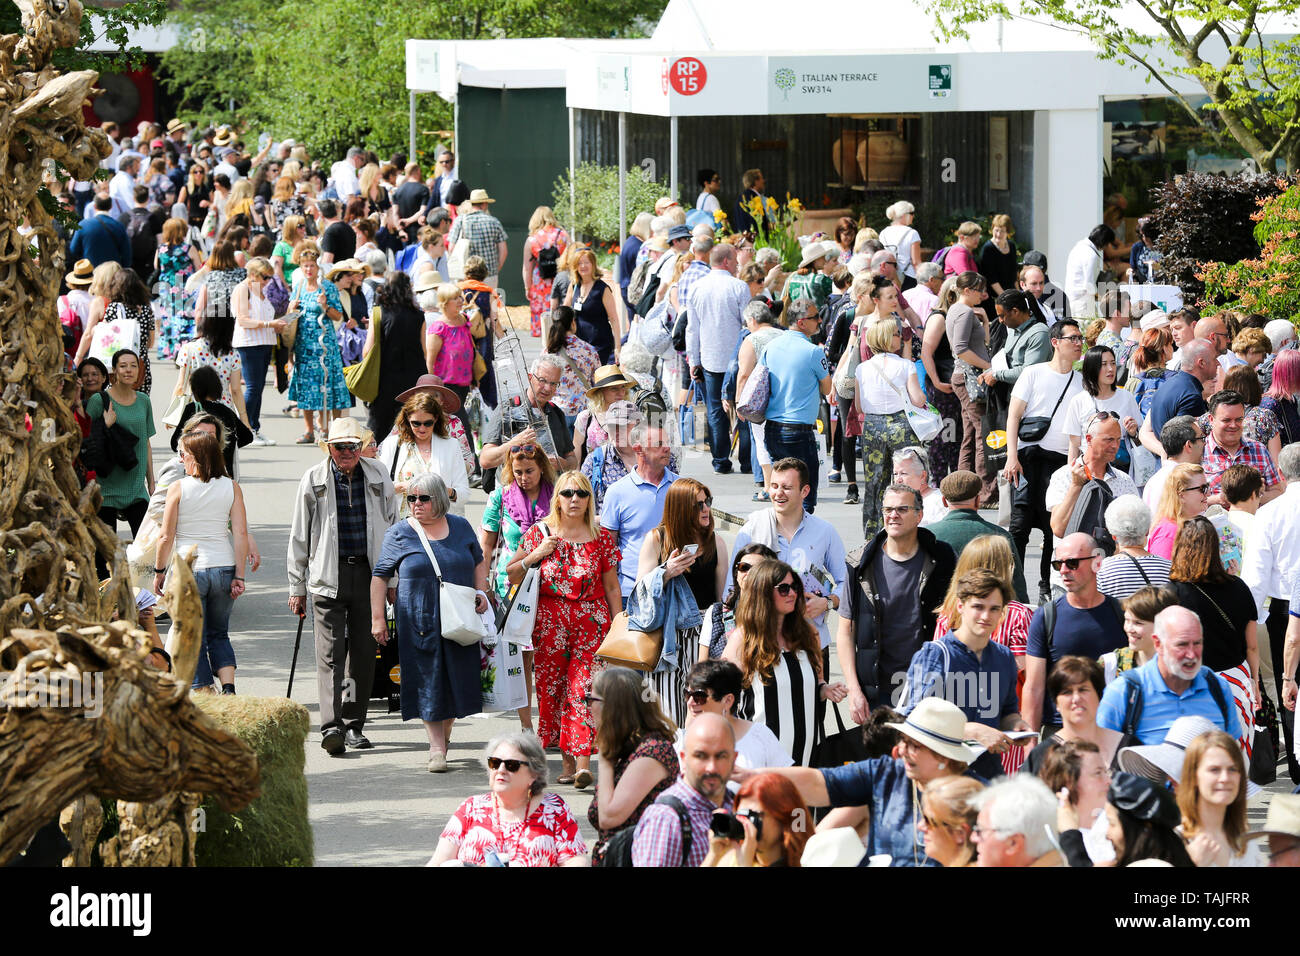 London, UK. 26th May 2019. Large crowd of visitors at the RHS Chelsea Flower Show on the final day of the show. The Royal Horticultural Society Chelsea Flower Show is an annual garden show held in the grounds of the Royal Hospital Chelsea in West London since 1913.  Credit: Dinendra Haria/Alamy Live News Stock Photo